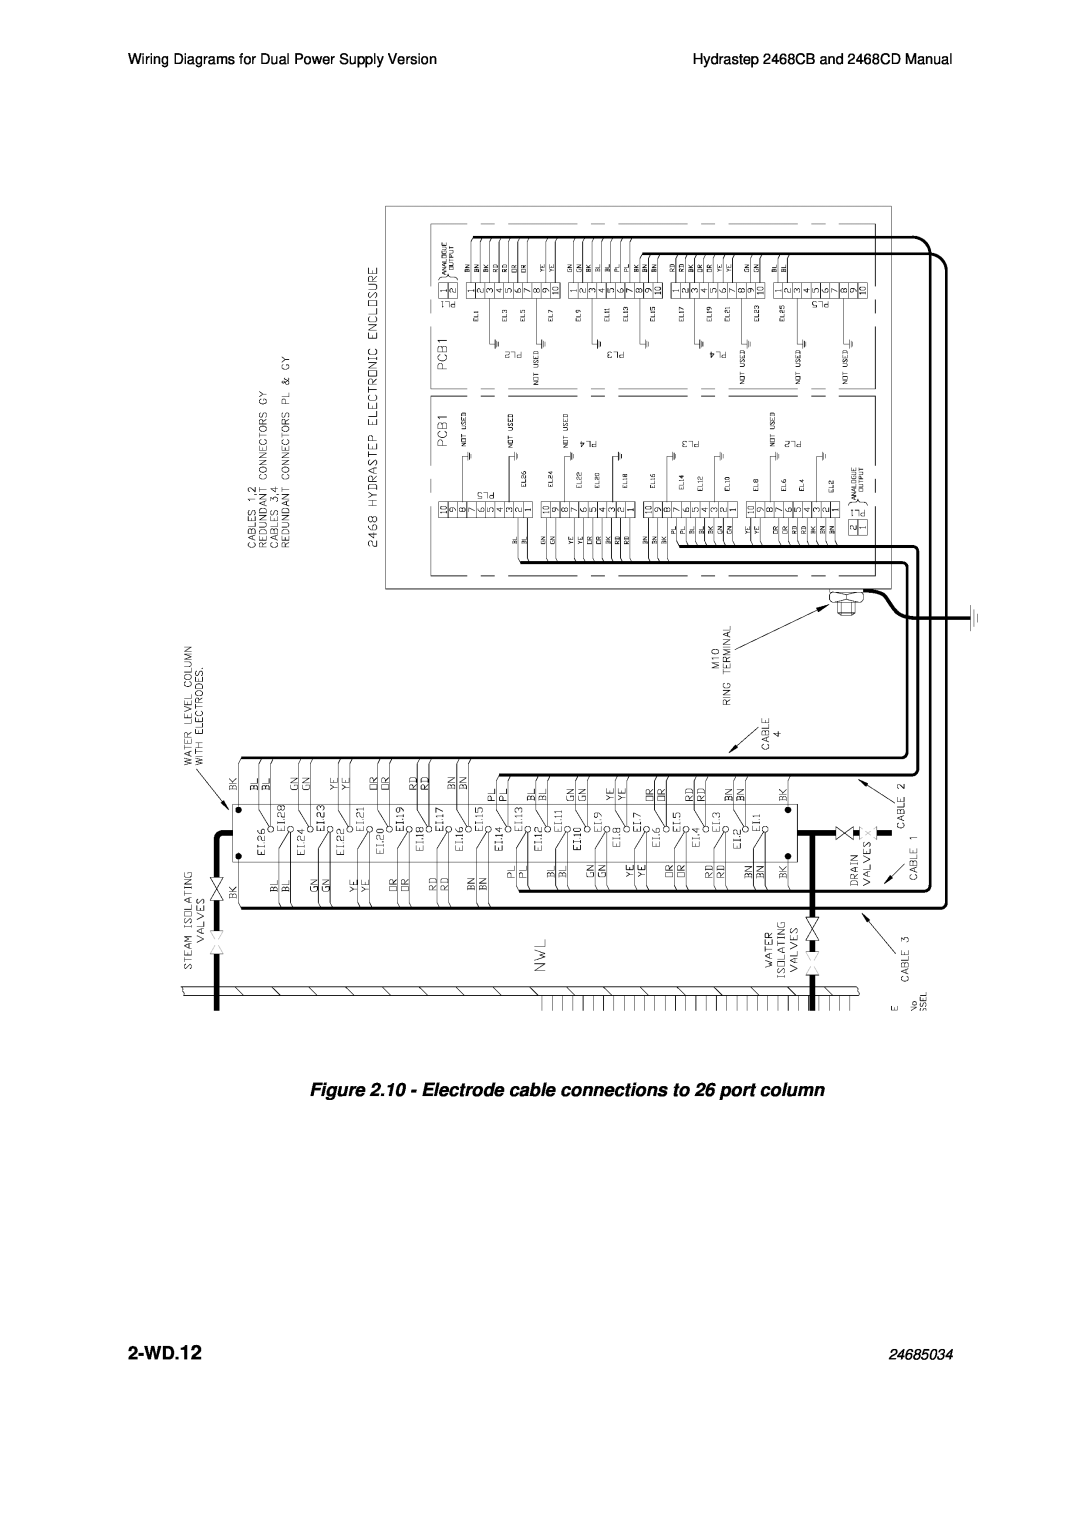 Emerson manual 2-WD.12, Wiring Diagrams for Dual Power Supply Version, Hydrastep 2468CB and 2468CD Manual, 24685034 